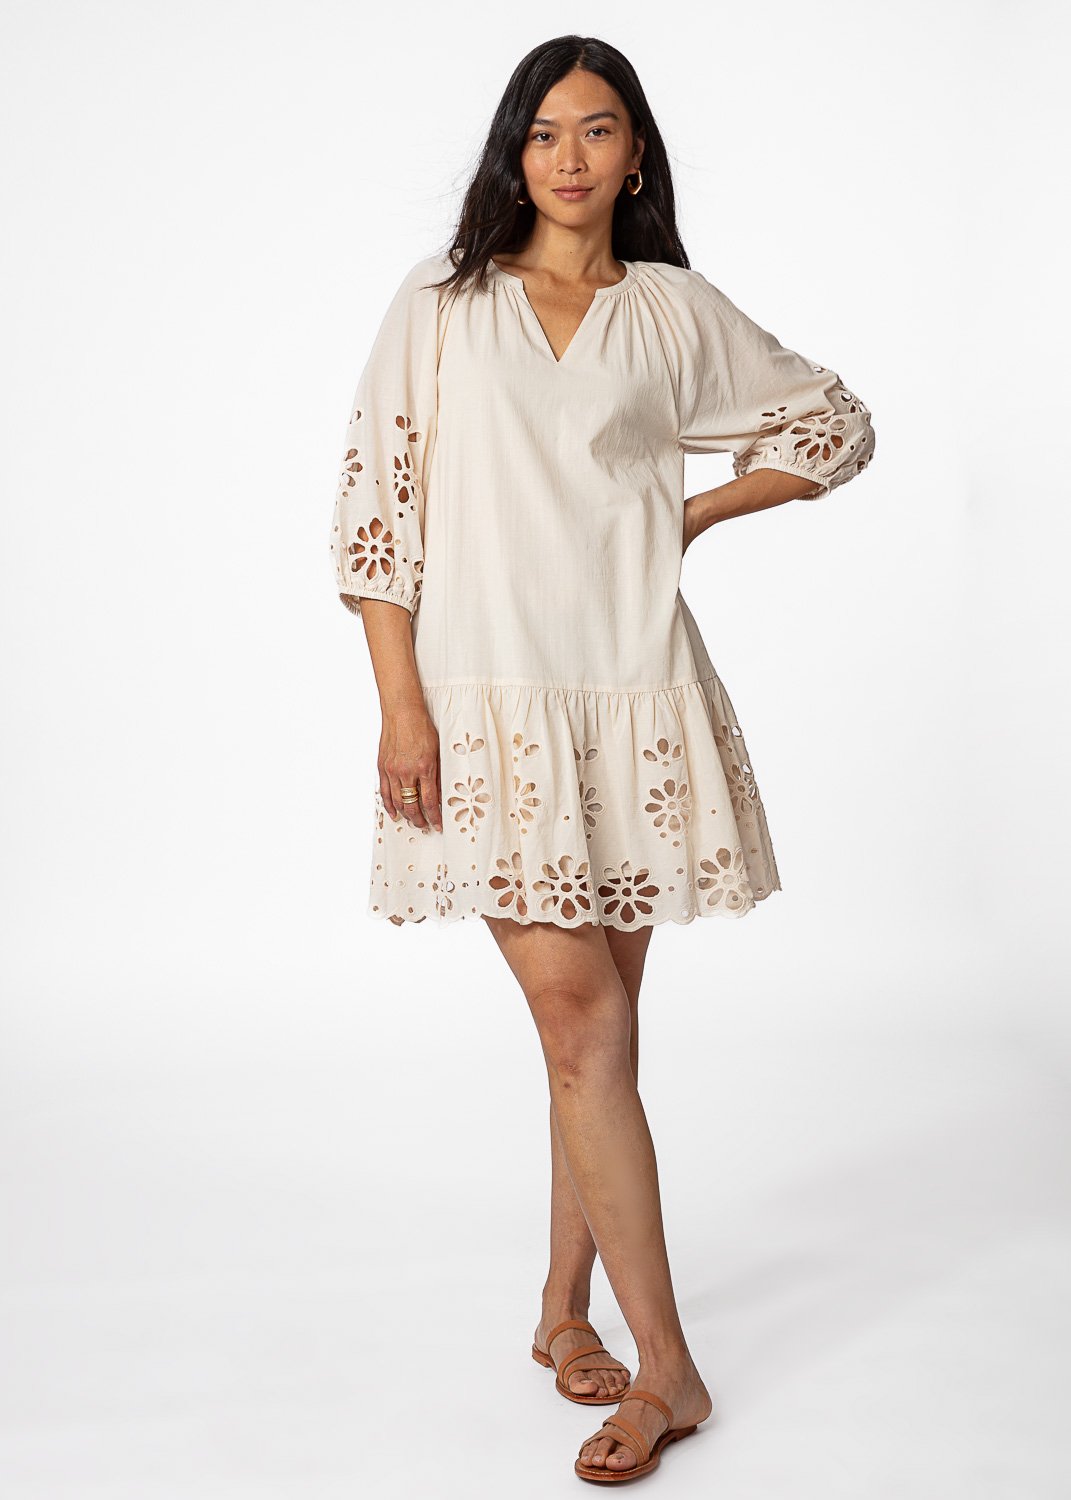 Beige dress in broderie anglaise